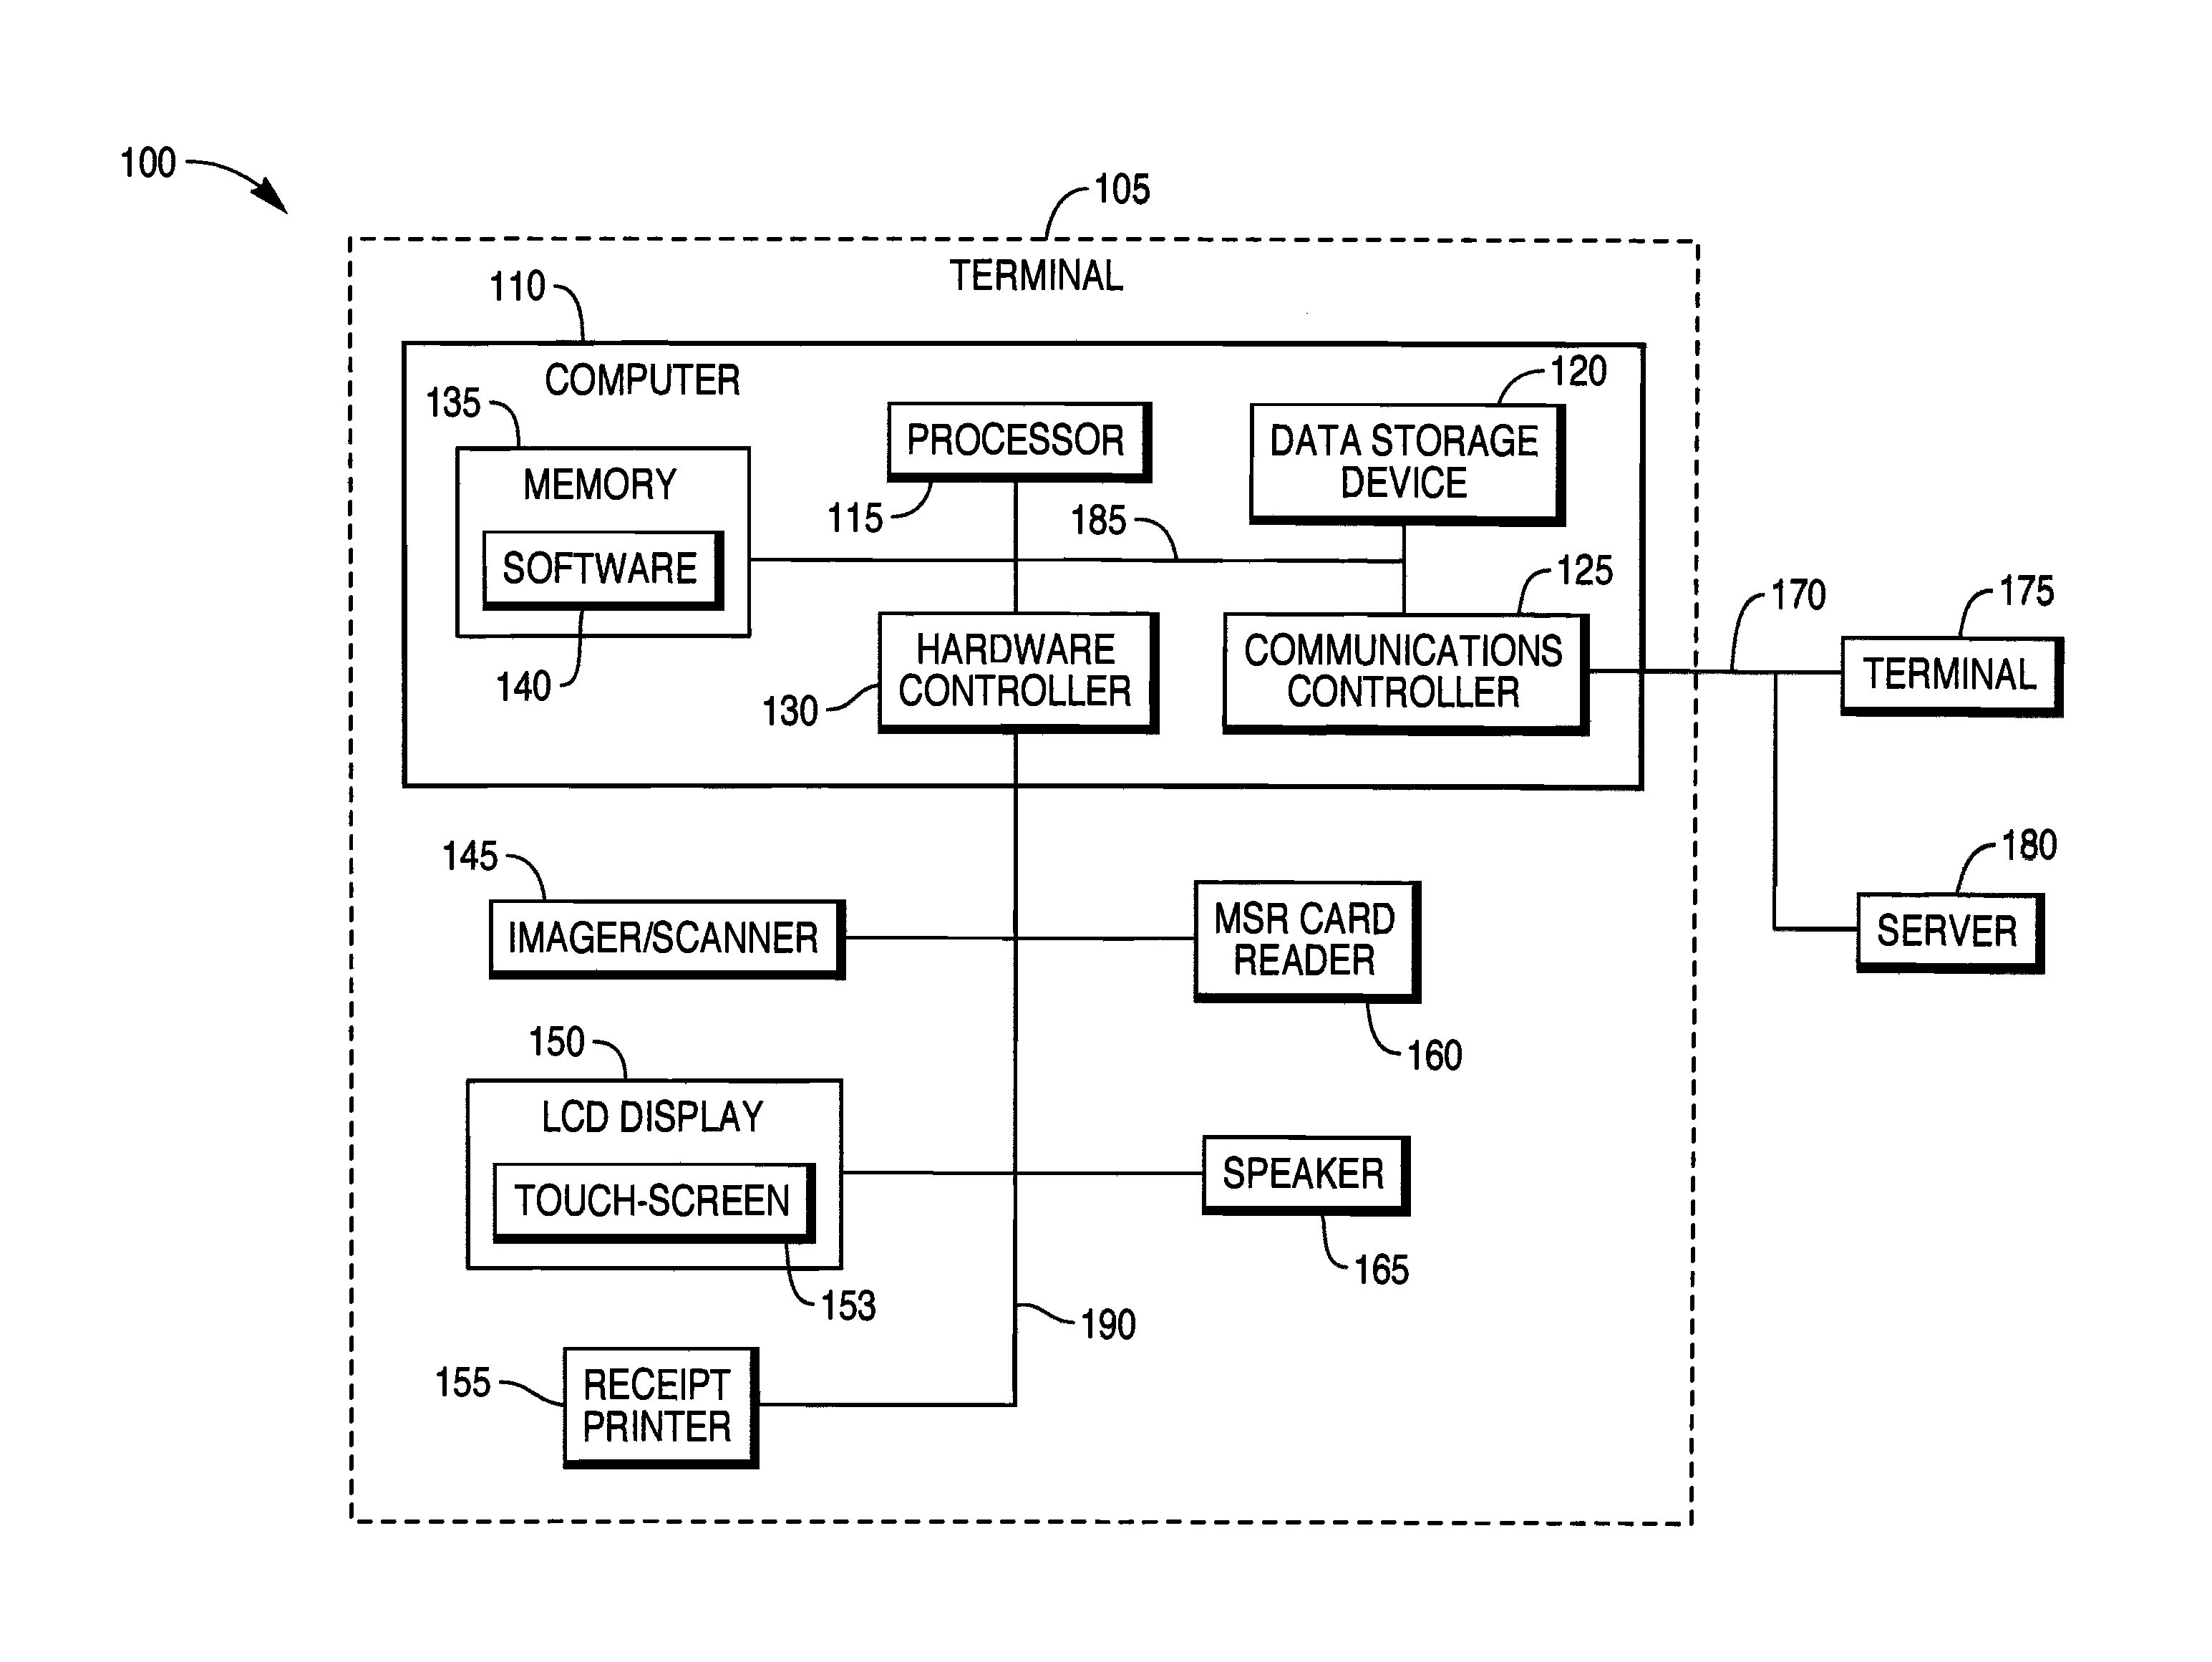 System, method and apparatus for implementing an improved user interface